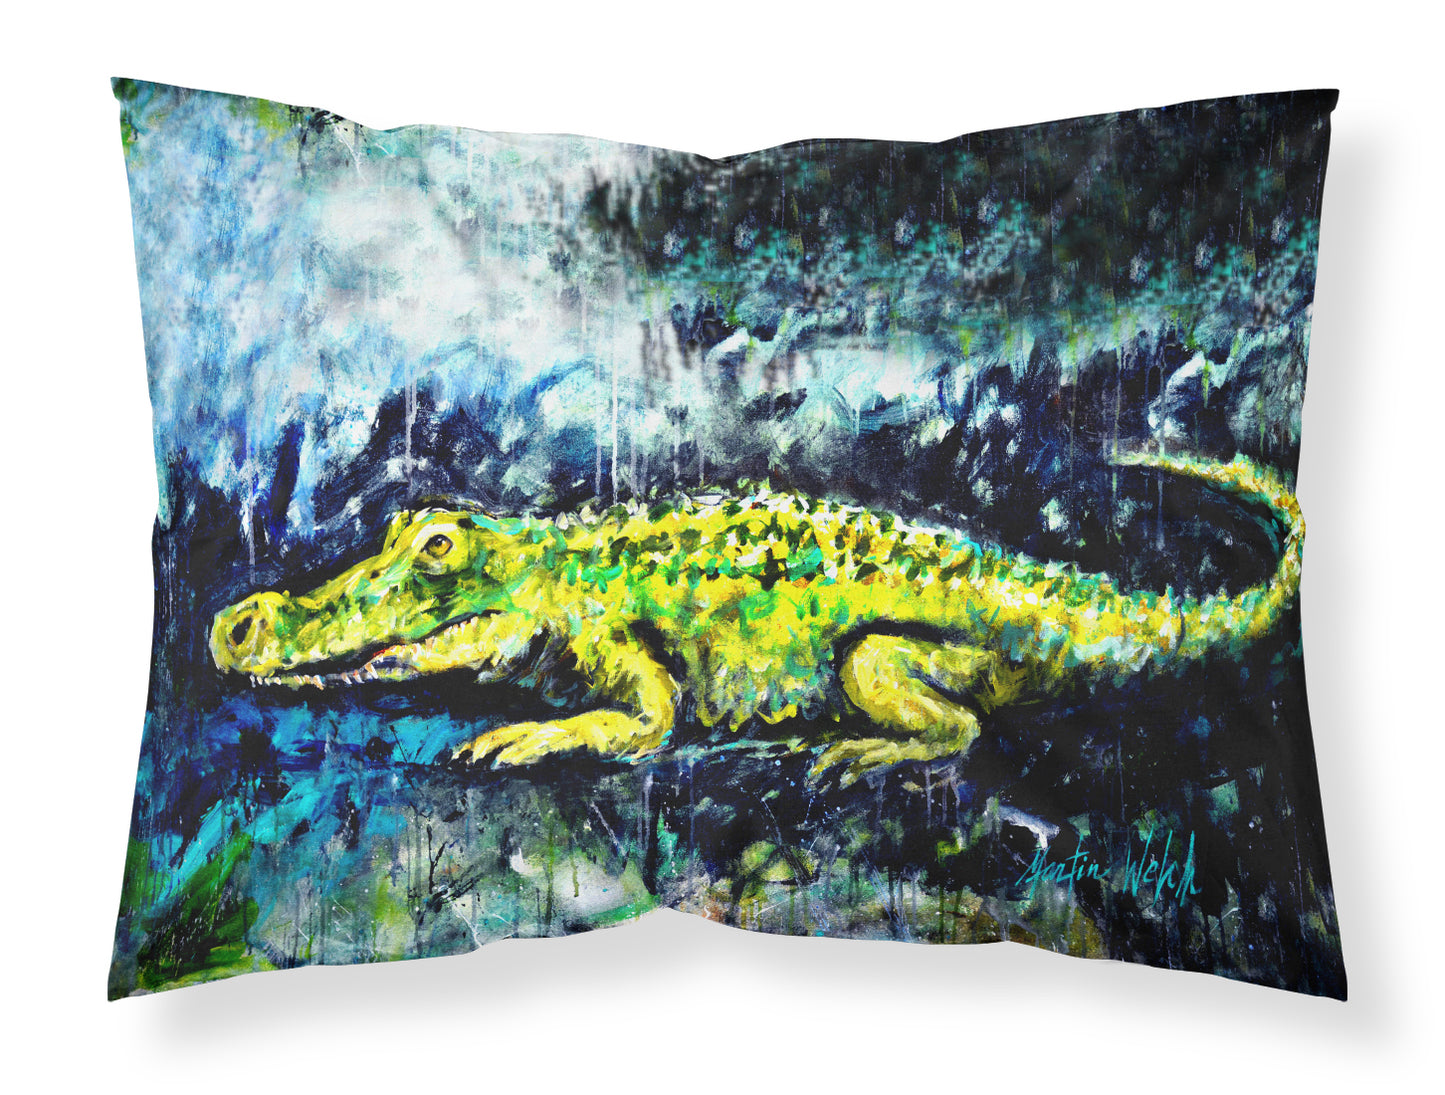 Buy this Sneaky Alligator Fabric Standard Pillowcase